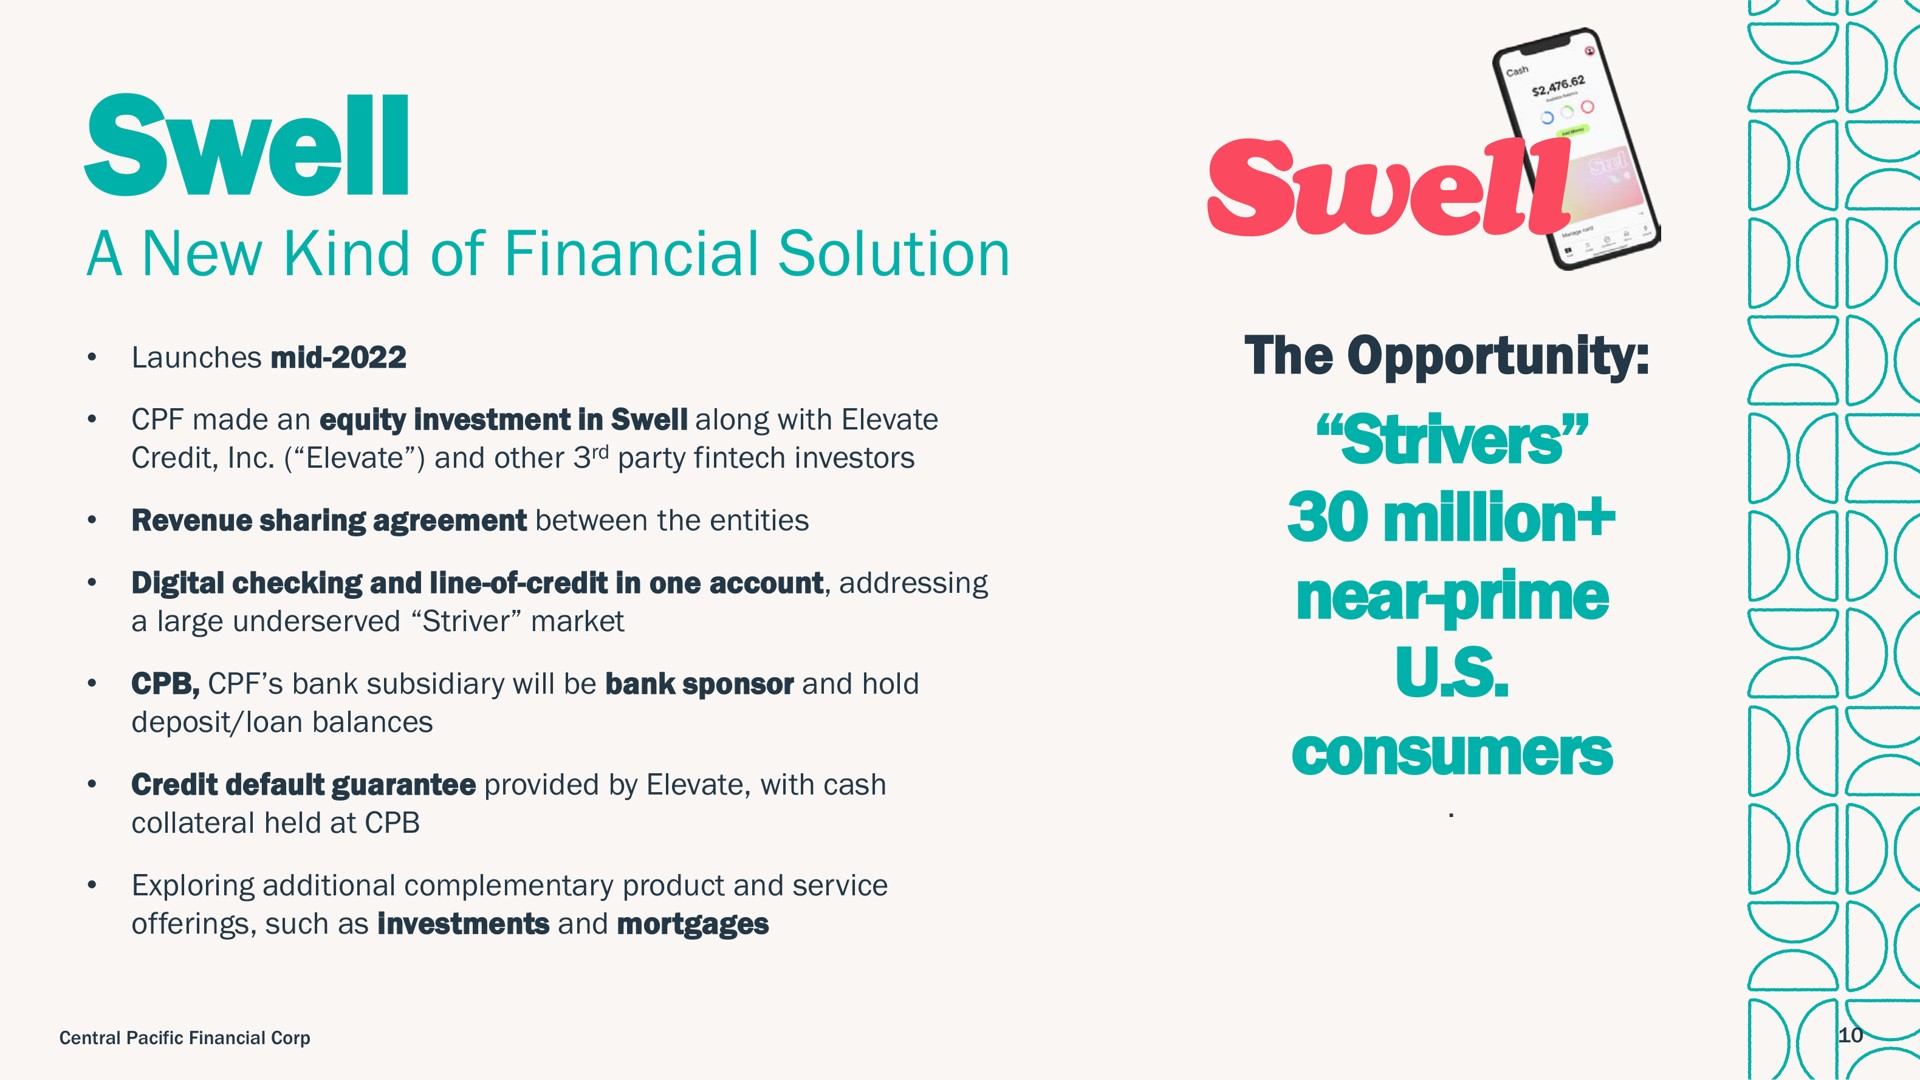 swell a new kind of financial solution the opportunity strivers million near prime consumers | Central Pacific Financial